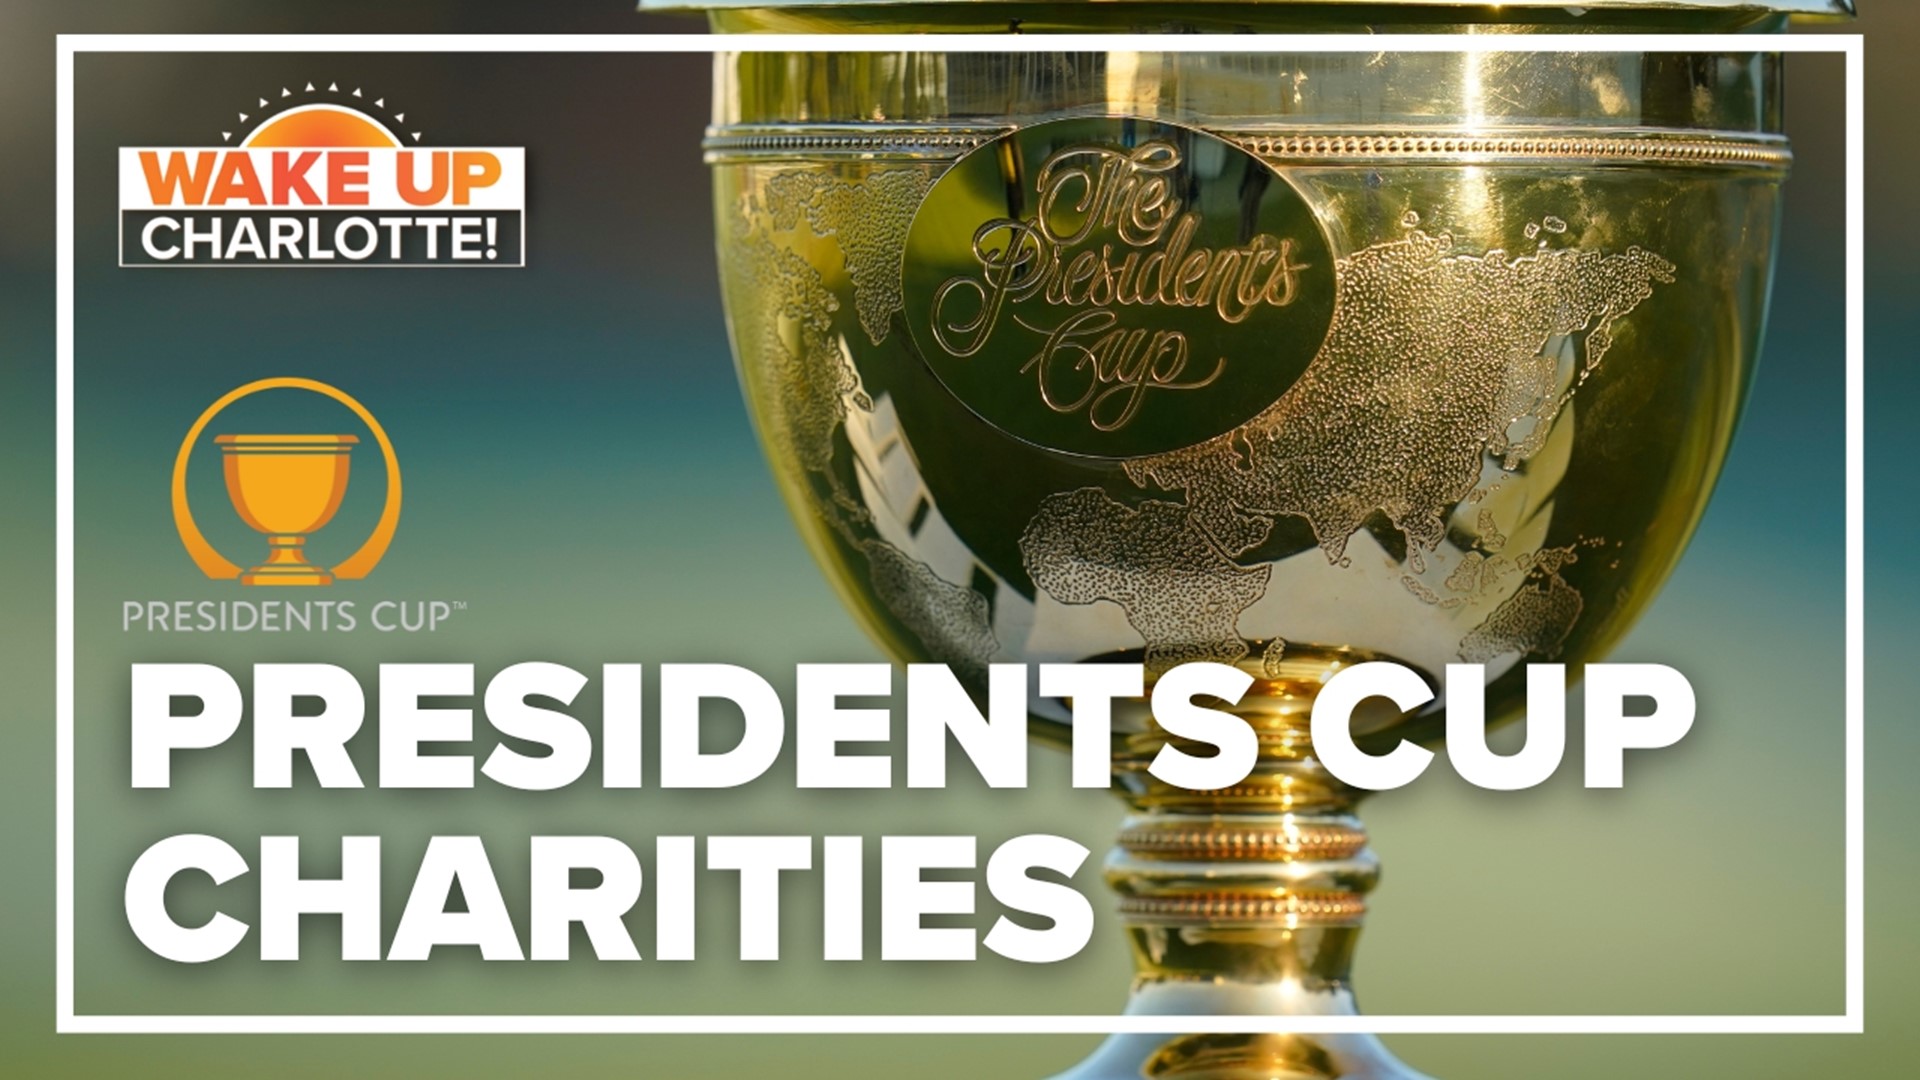 Unlike most sporting events, players aren't paid to participate in the Presidents Cup.